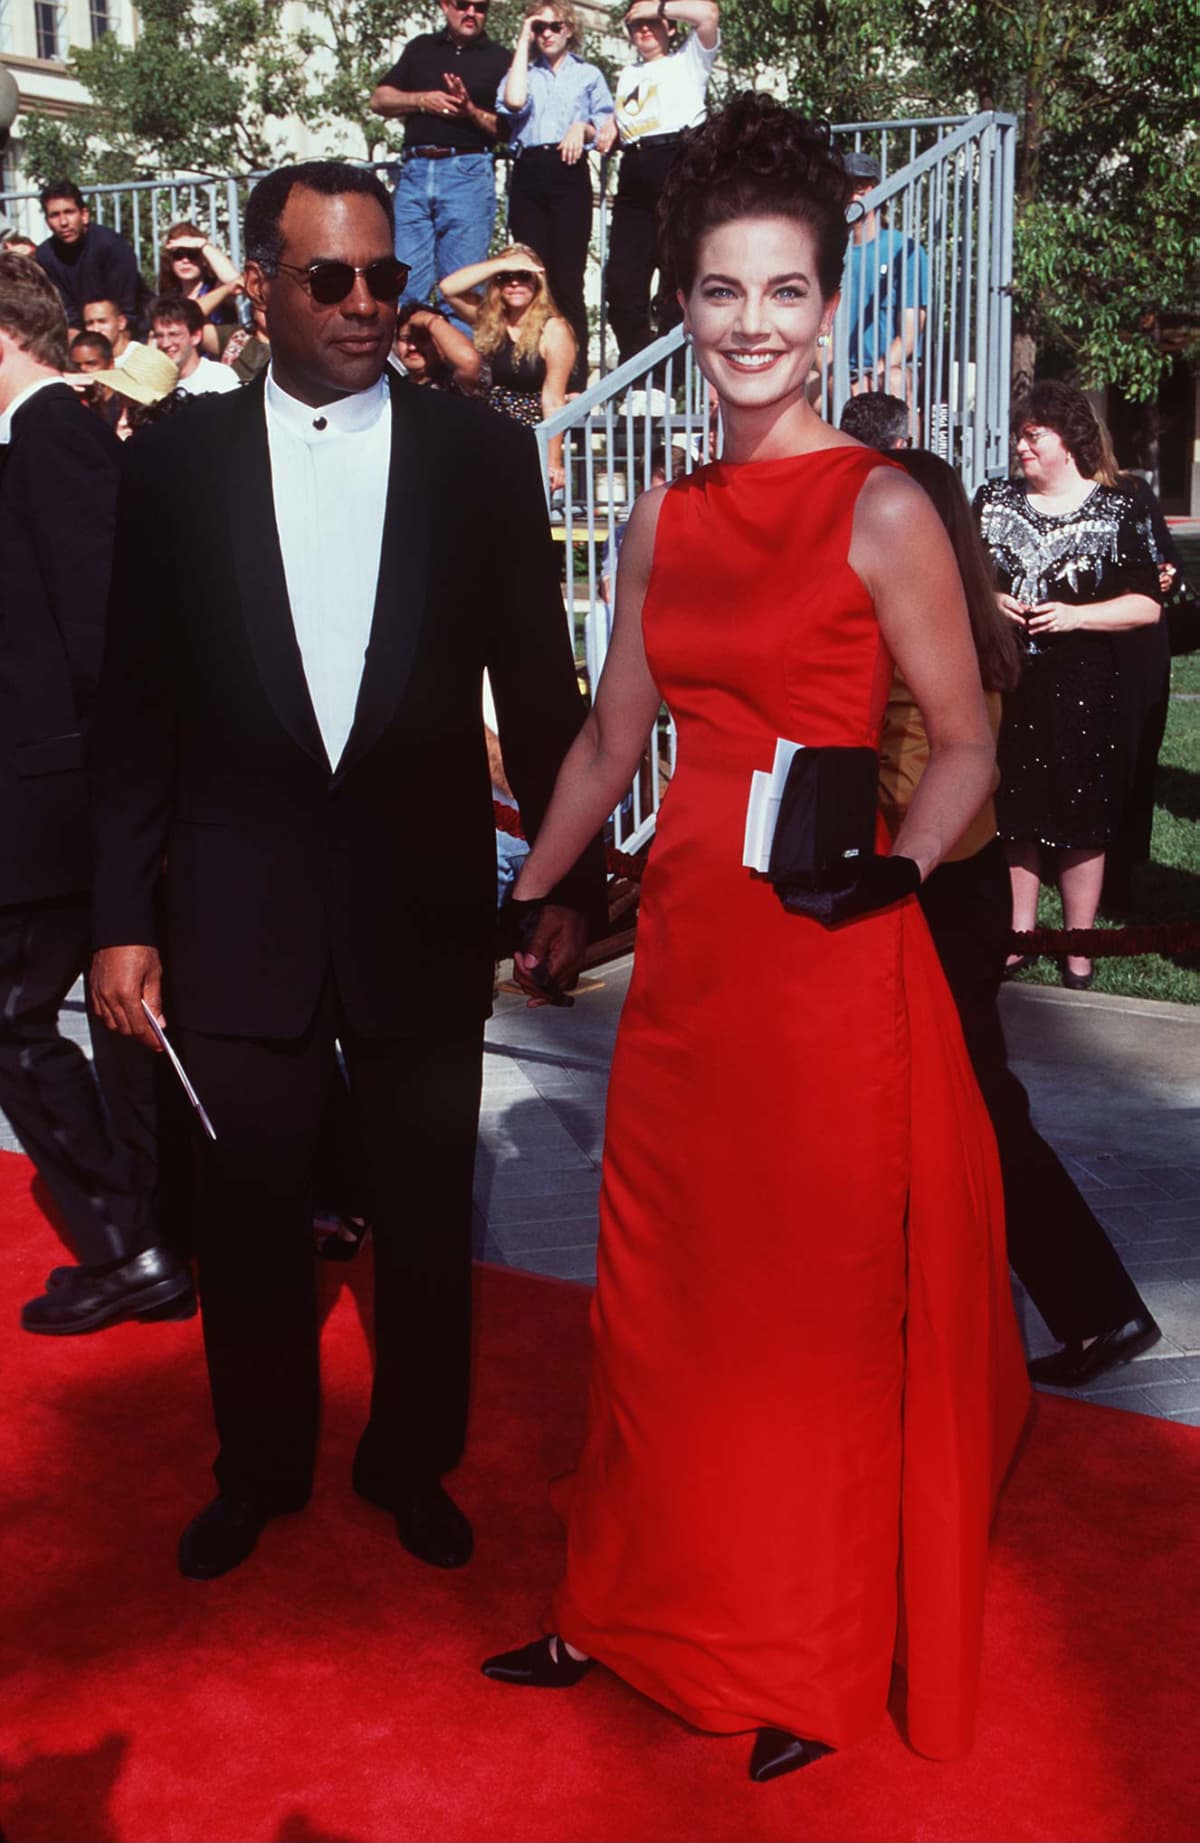 Michael Dorn and Terry Farrell during "Star Trek: 30 Years and Beyond - A Live Tribute" at Paramount Studios in Los Angeles, California, United States. (Photo by SGranitz/WireImage)